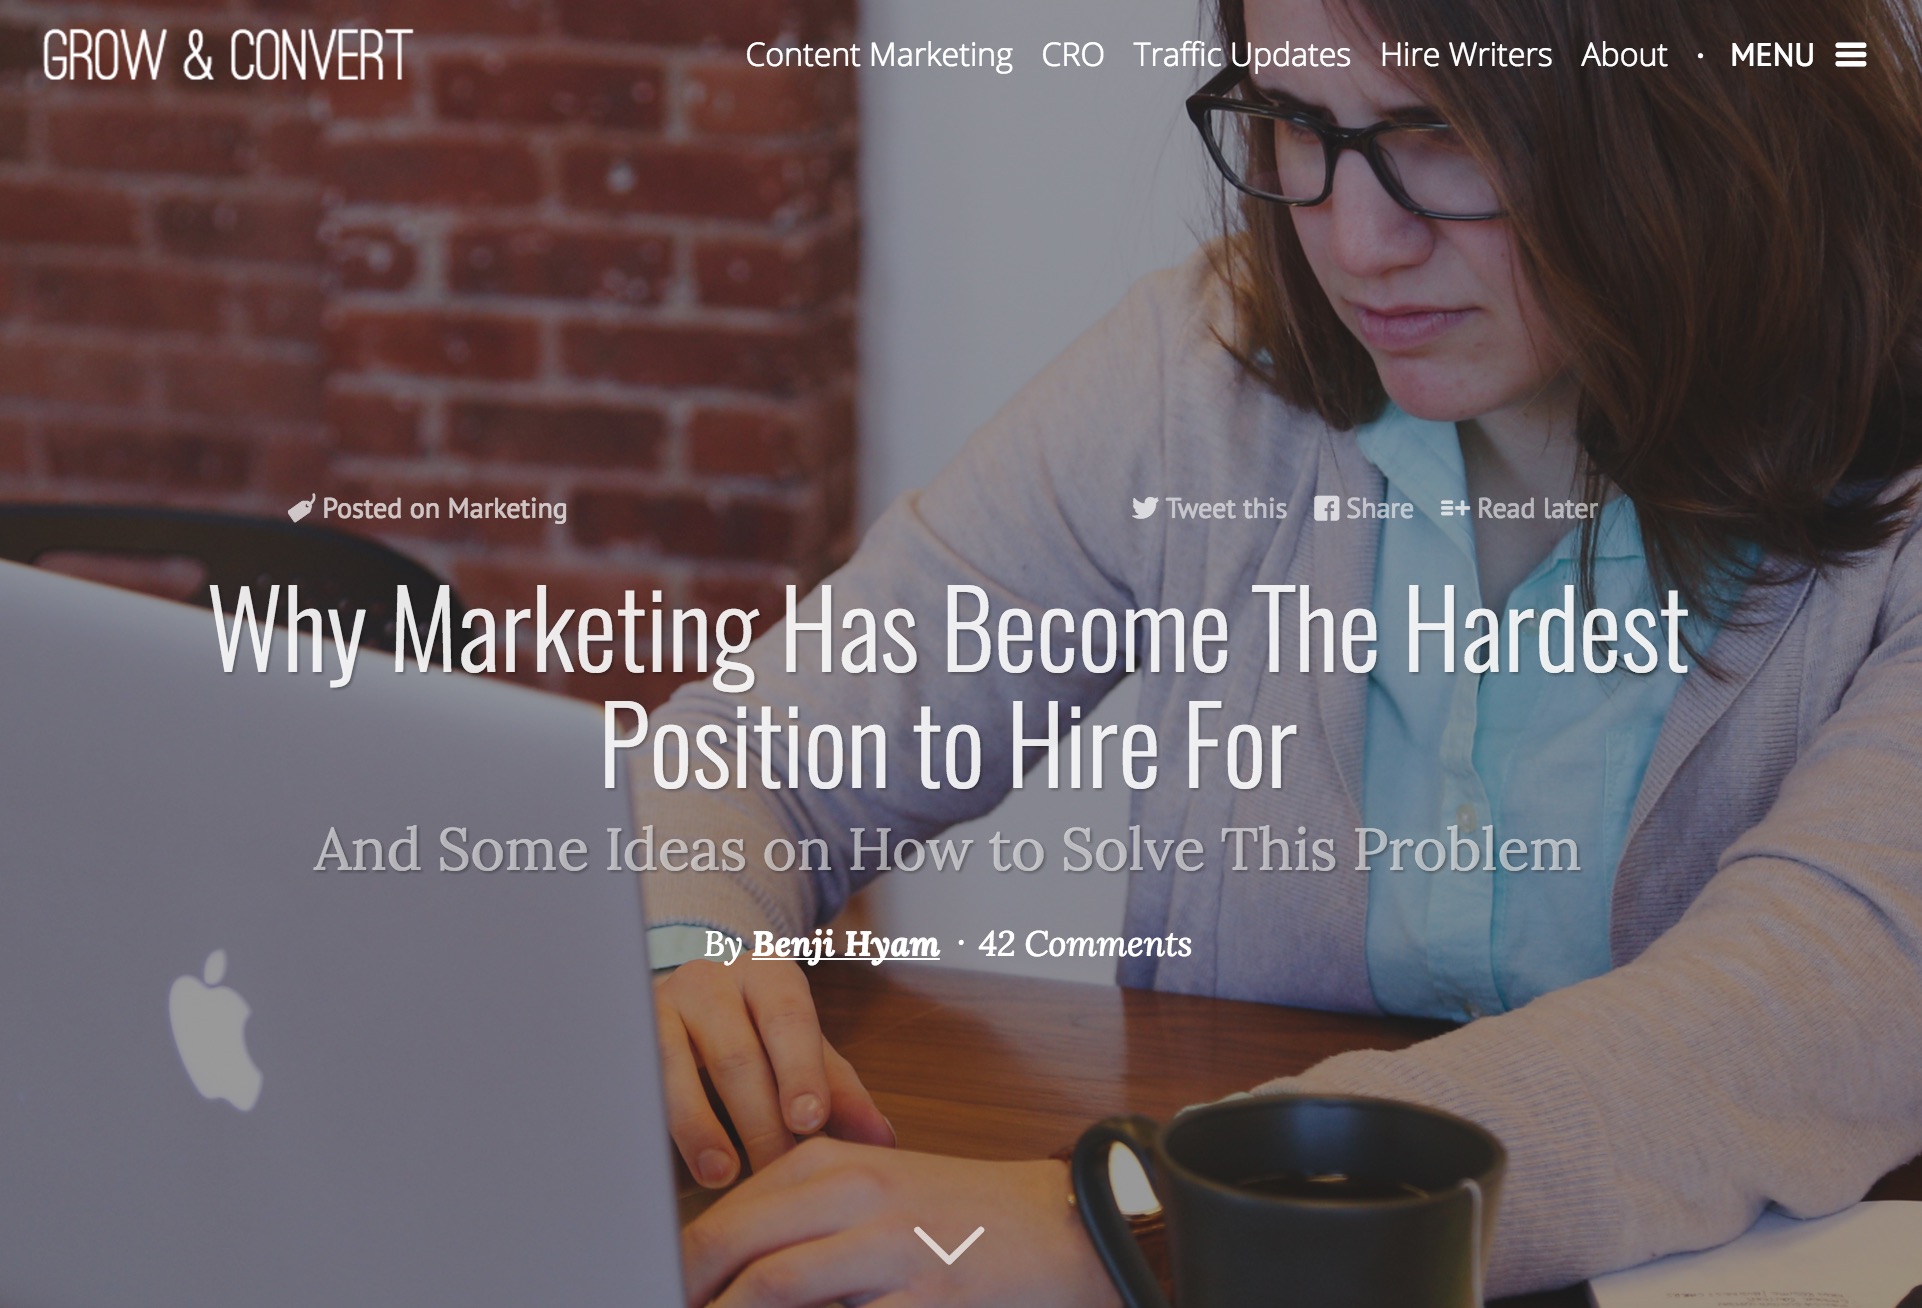 Why_Marketing_Has_Become_The_Hardest_Position_to_Hire_For